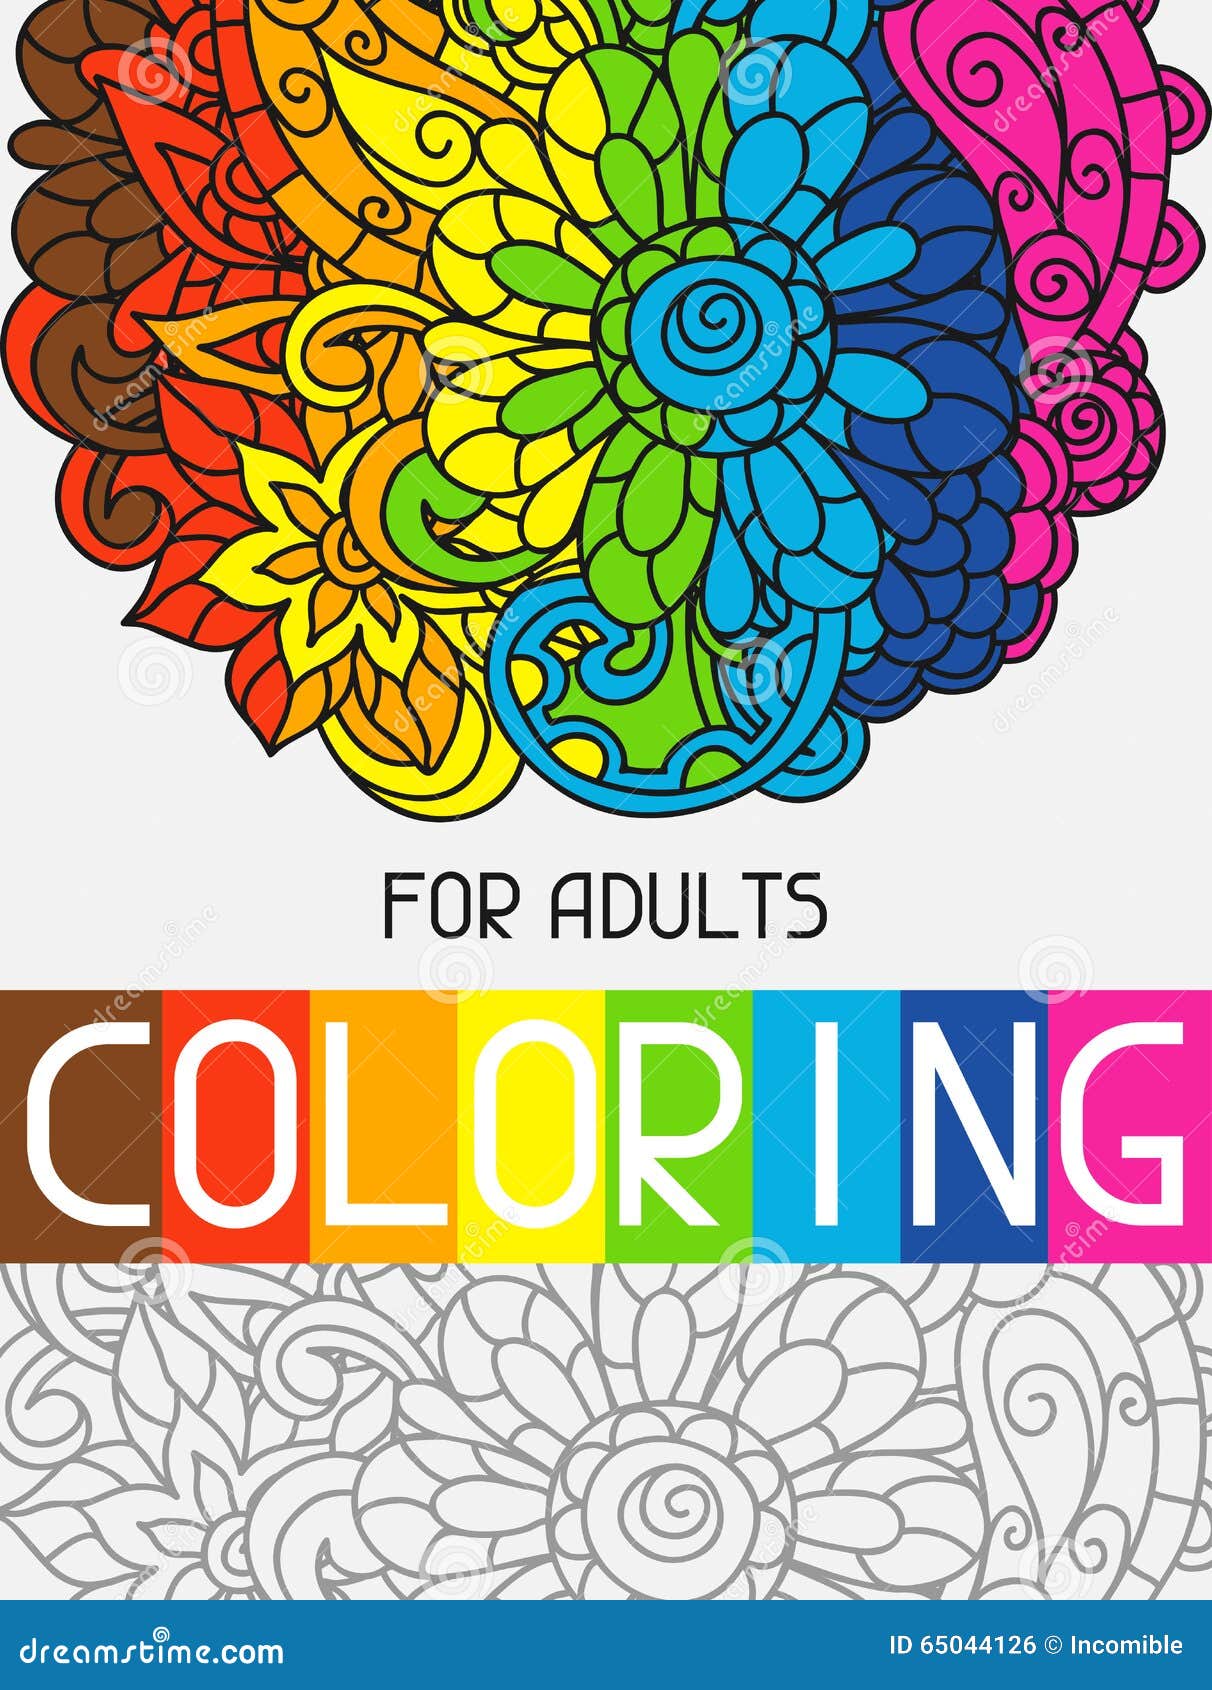 Download Adult Coloring Book Design For Cover Illustration Stock Vector Illustration Of Paint Artwork 65044126